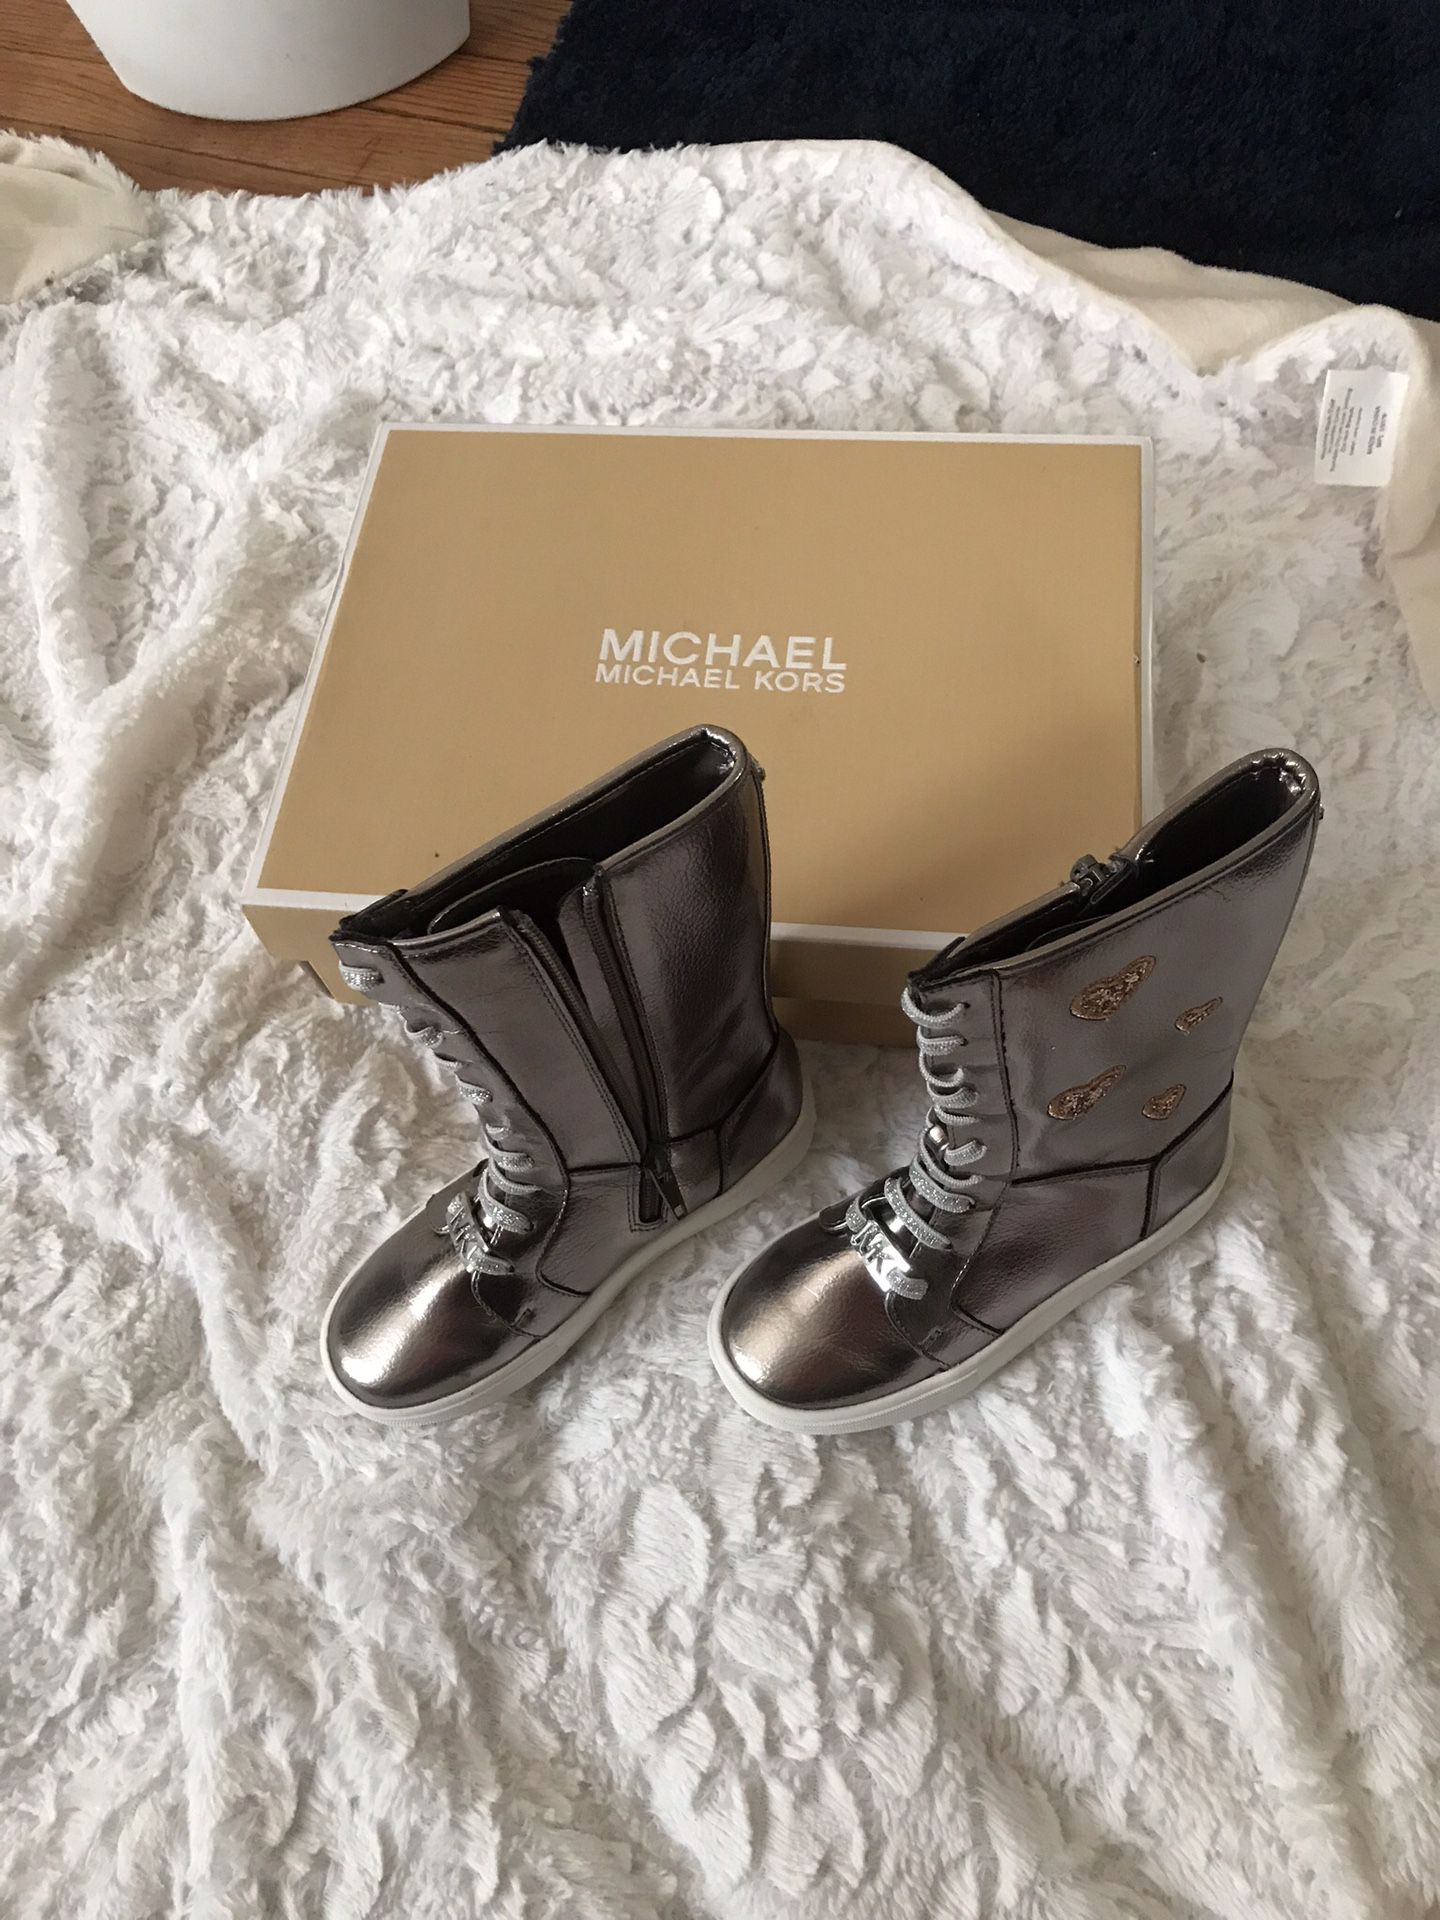 Brand new MK boots. Brand new with box